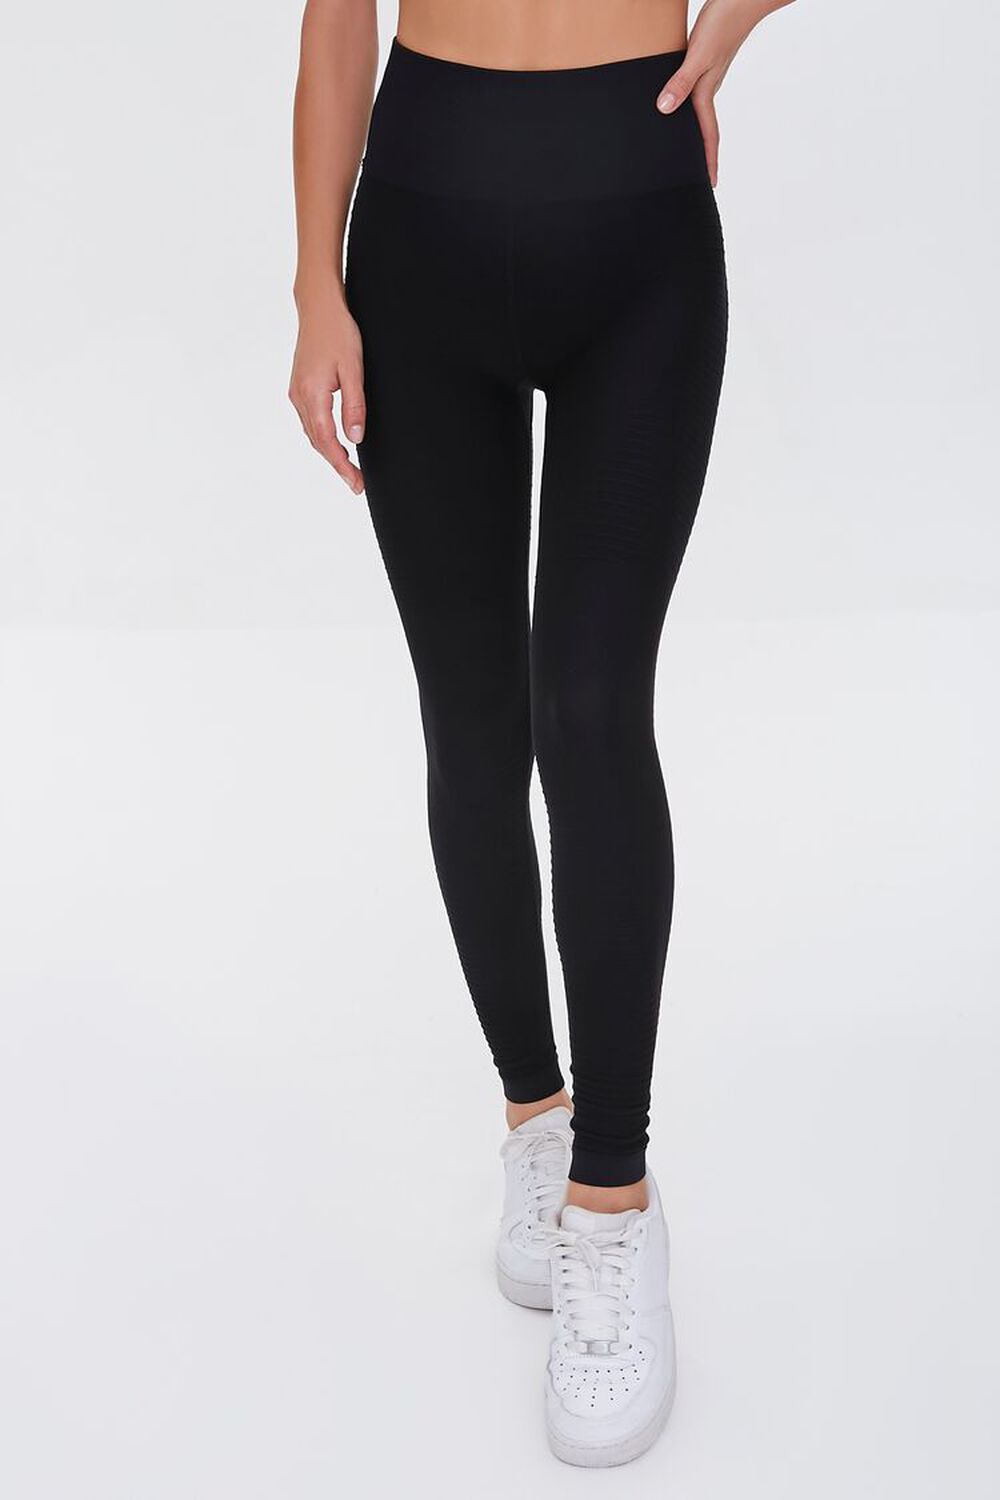 Forever 21 Classic Knit Leggings  Fashion, Forever 21 activewear